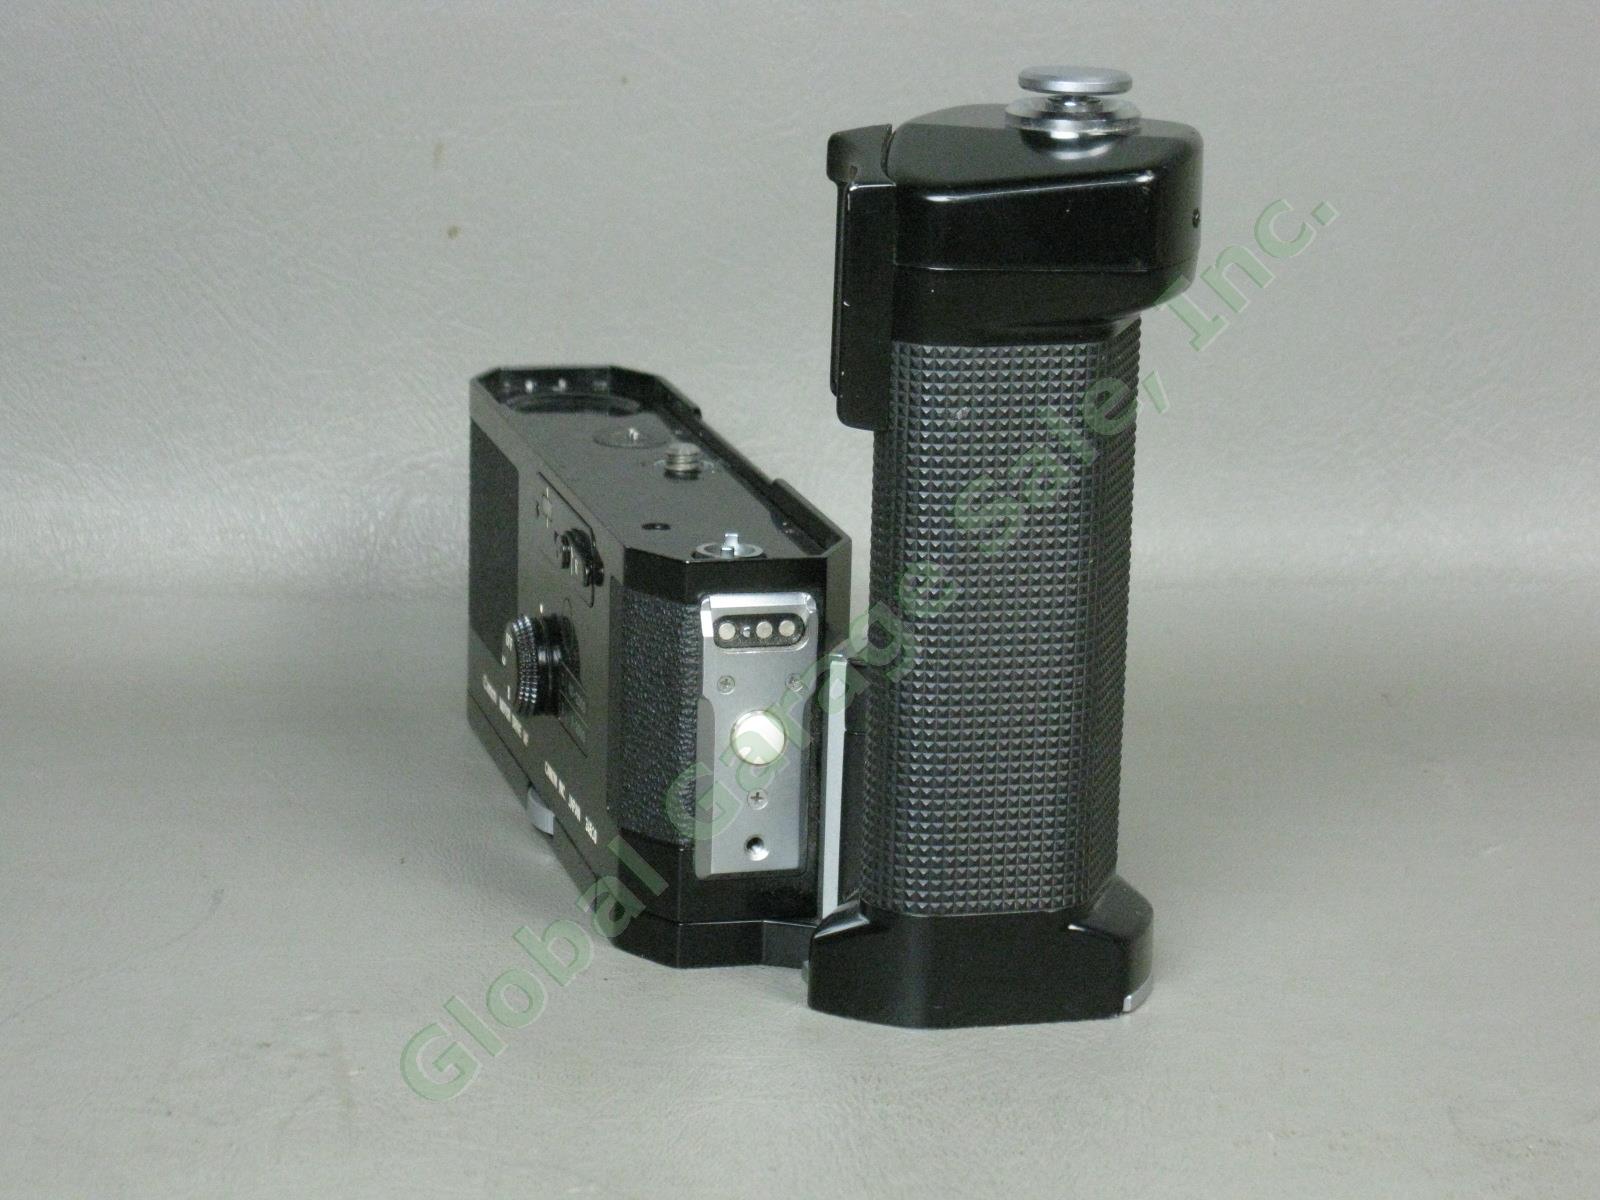 Canon Motor Drive MF w/ Grip For F1 Camera Body 34520 Very Good Cond No Reserve! 5